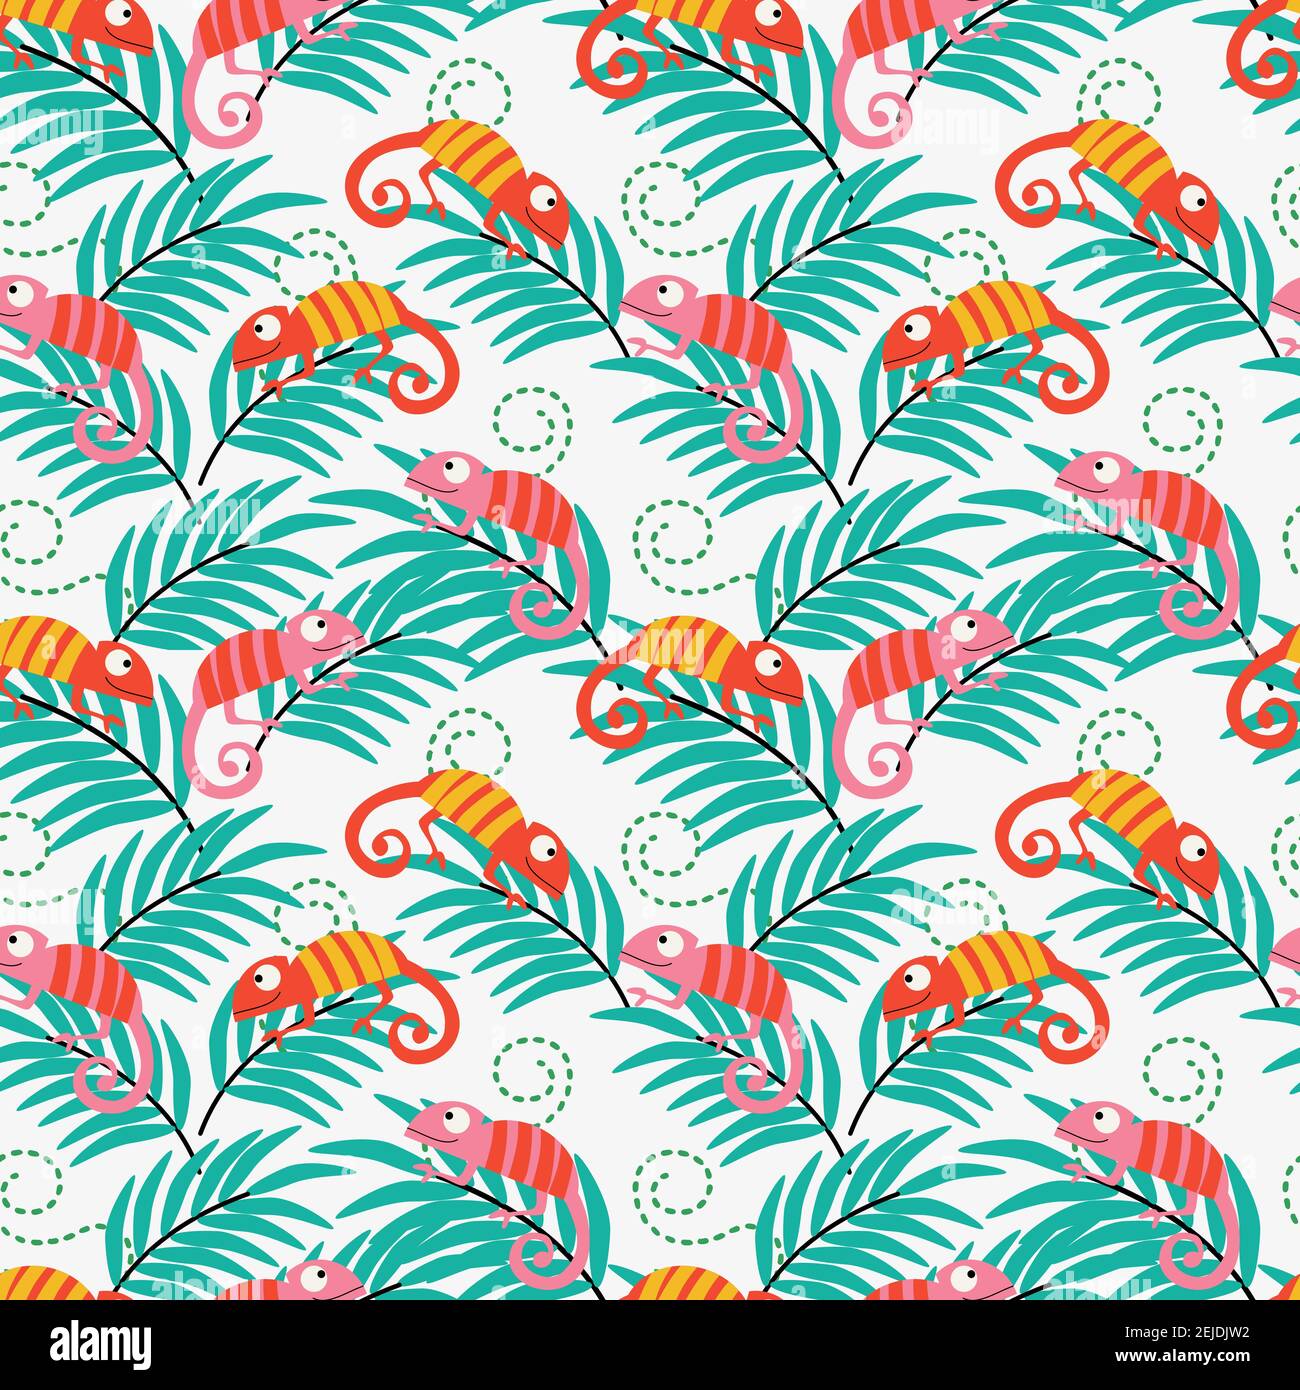 Colorful chameleon seamless pattern. Funny characters in cartoonish style. Tropical leaves pattern of chameleons. Stock Vector